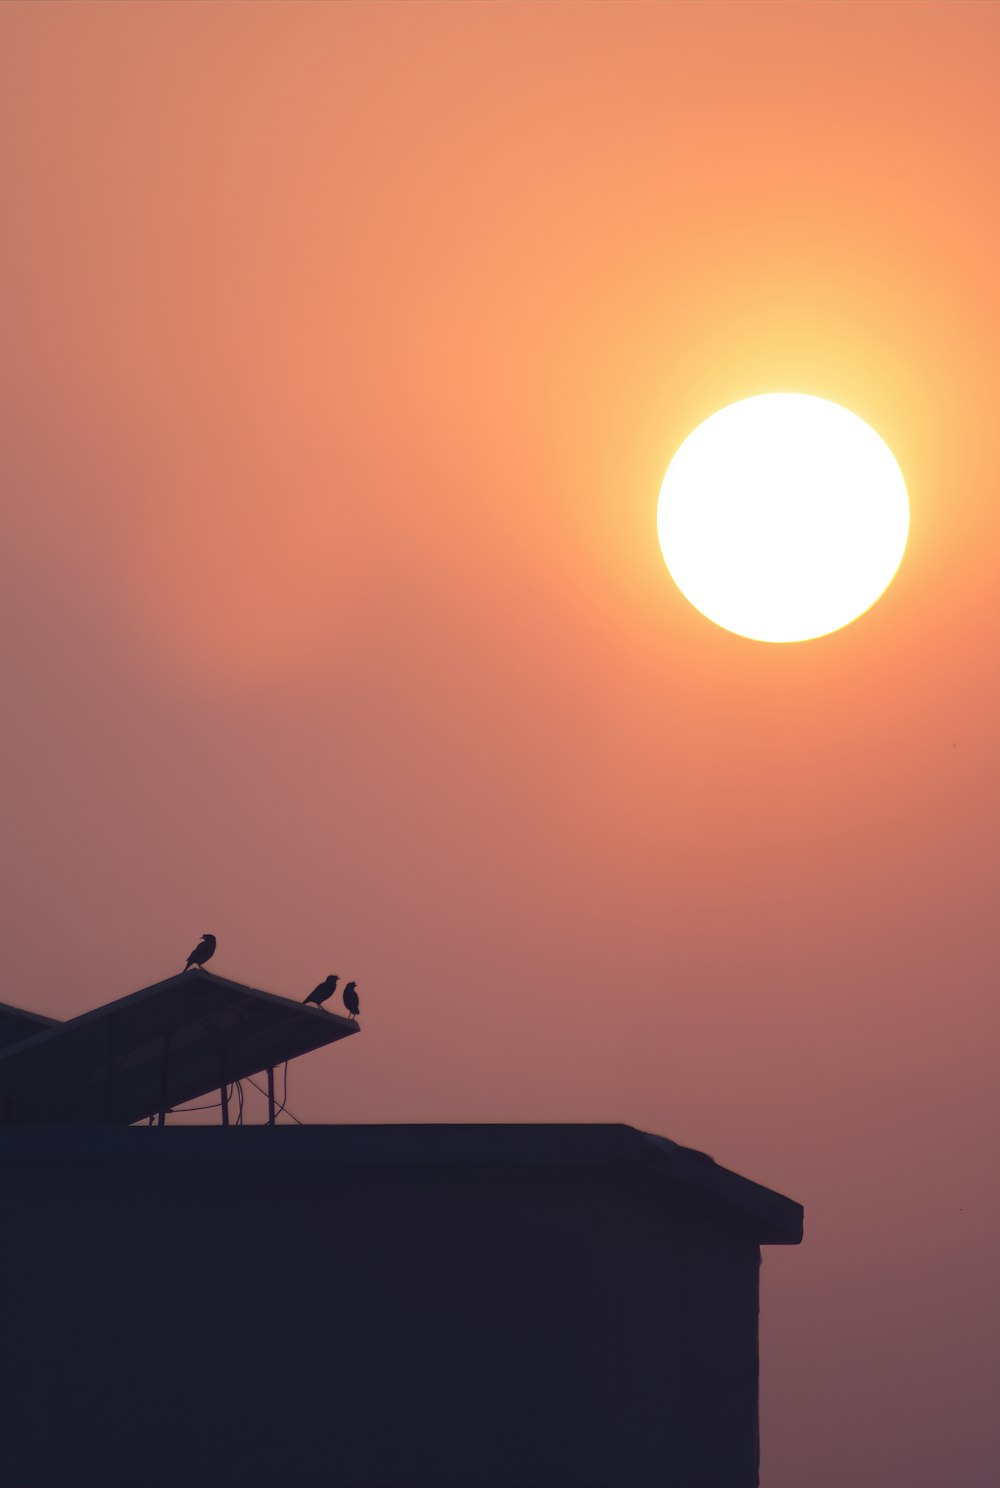 a bird sitting on top of a building with the sun in the background